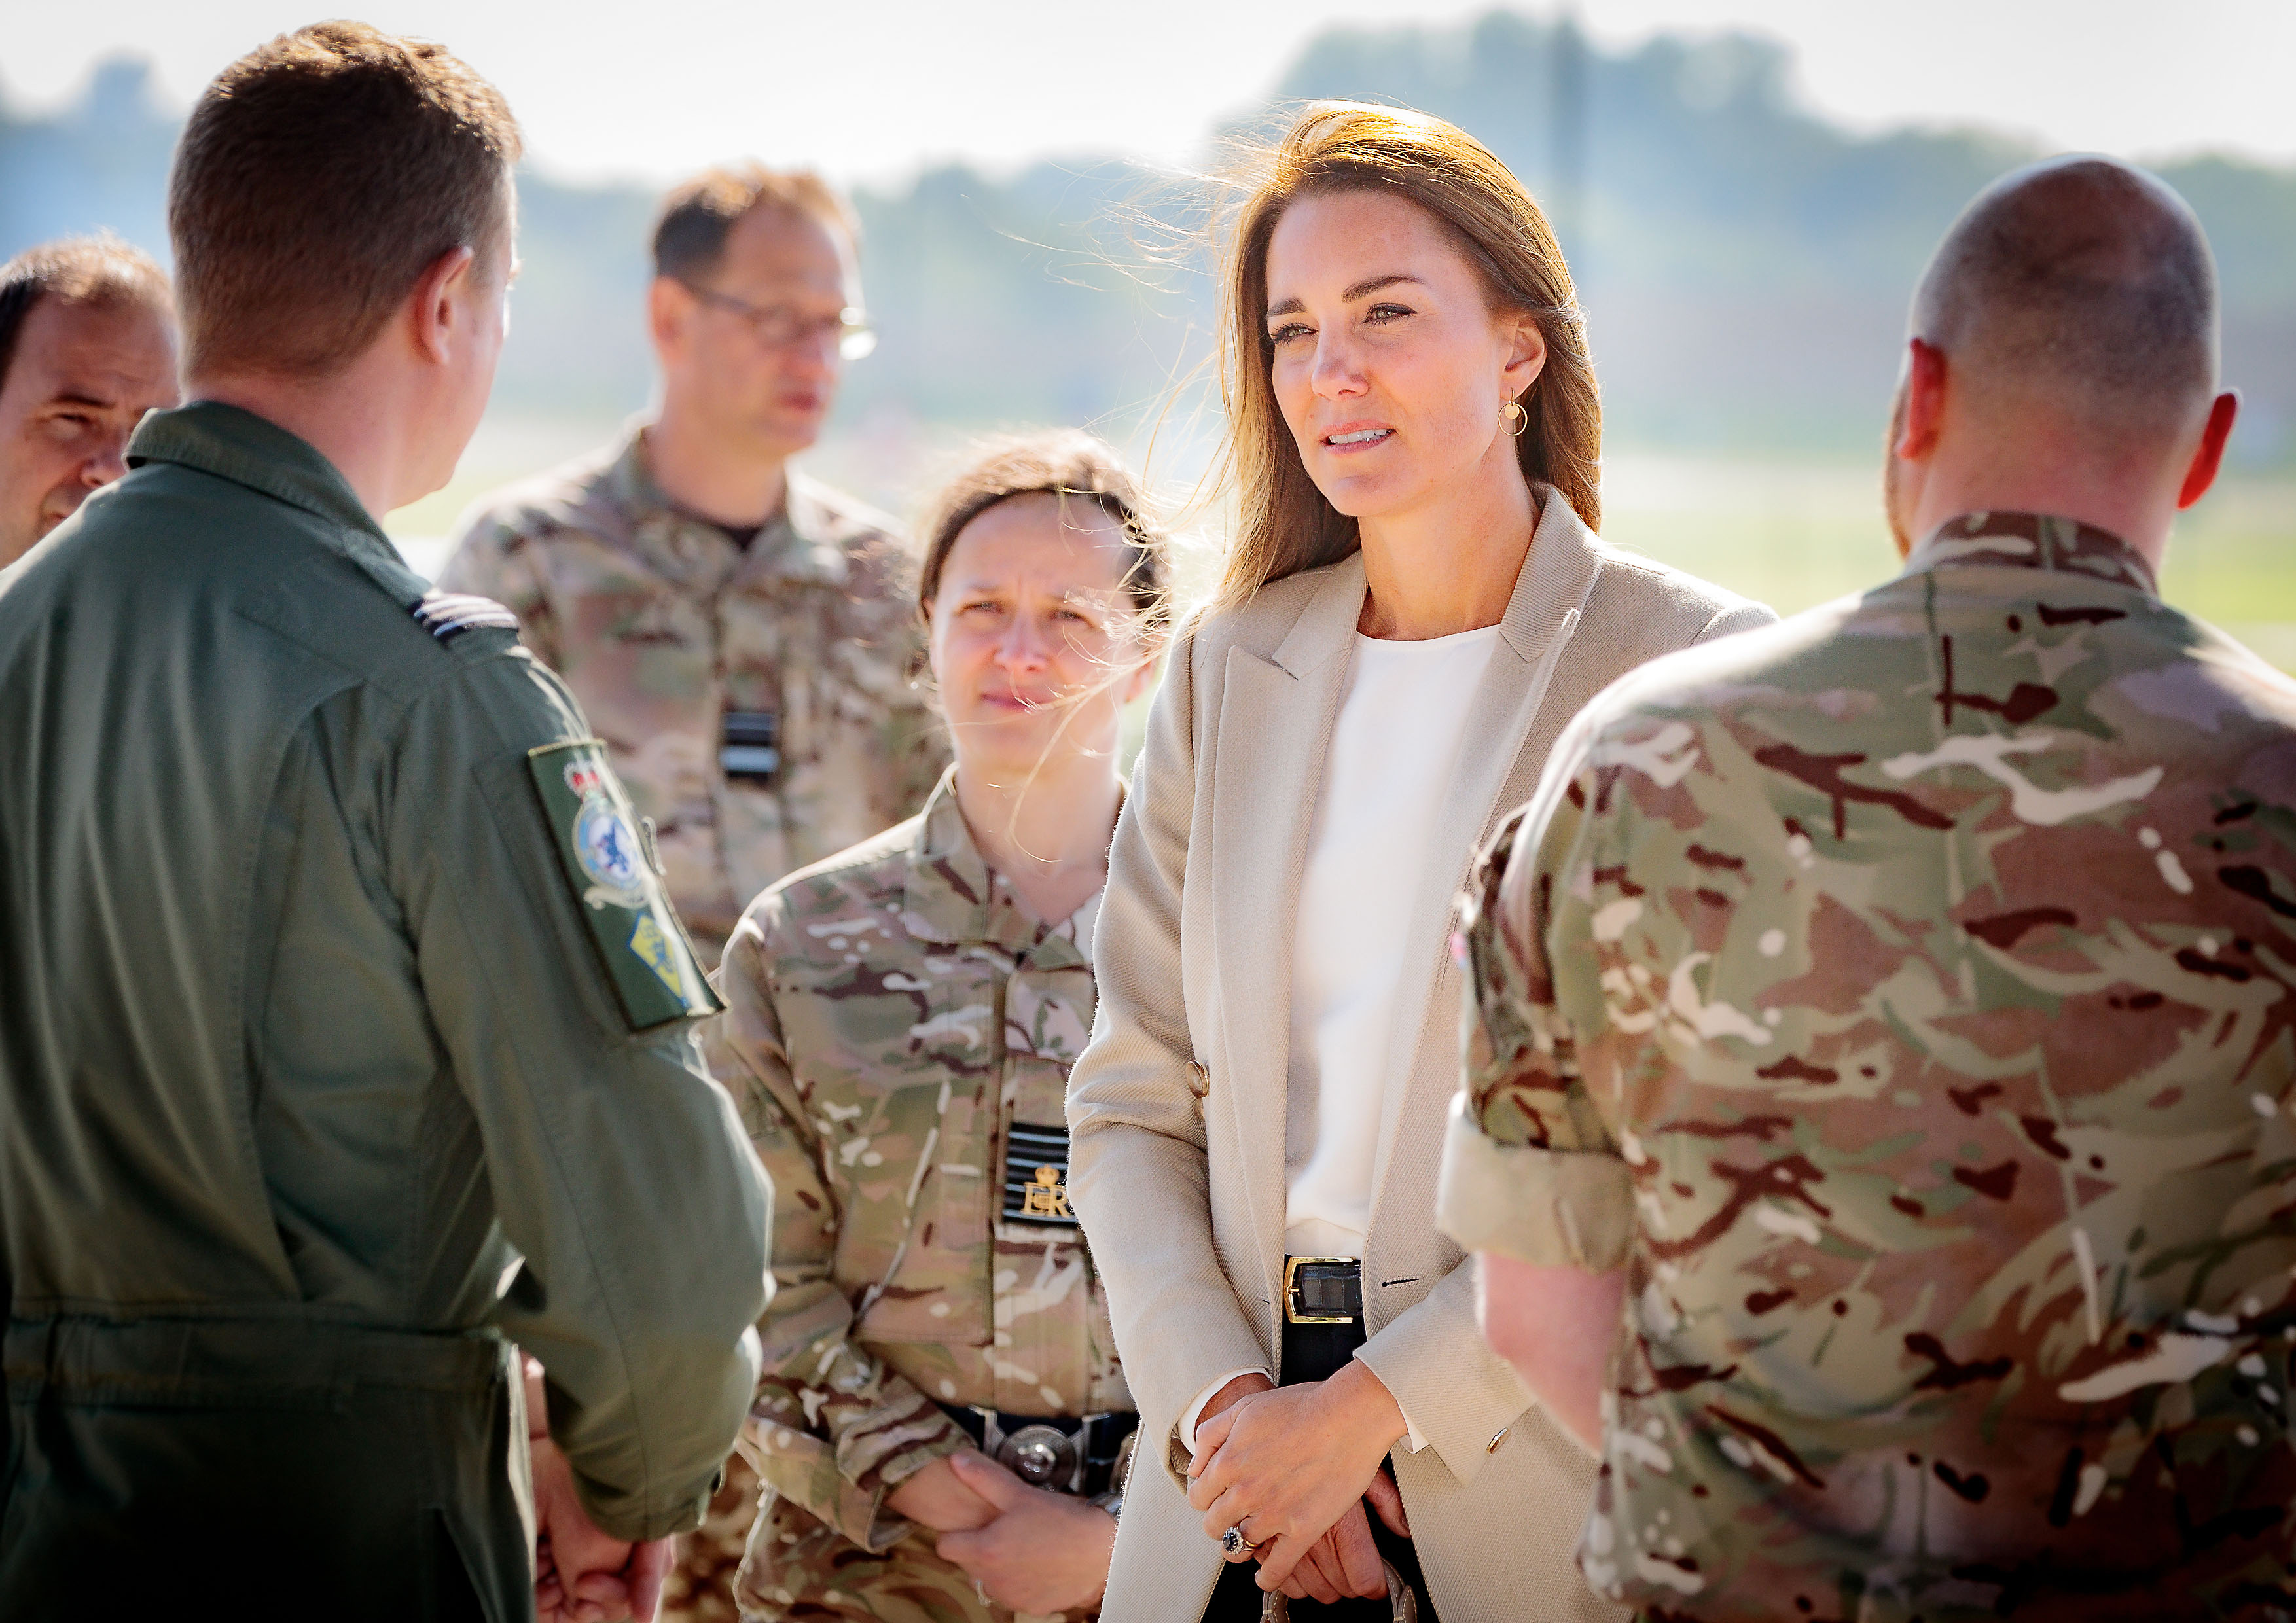 The Duchess of Cambridge visited RAF Brize Norton in Oxfordshire today, Wednesday 15th September where she met a number of those who supported the UK’s evacuation of civilians from Afghanistan.